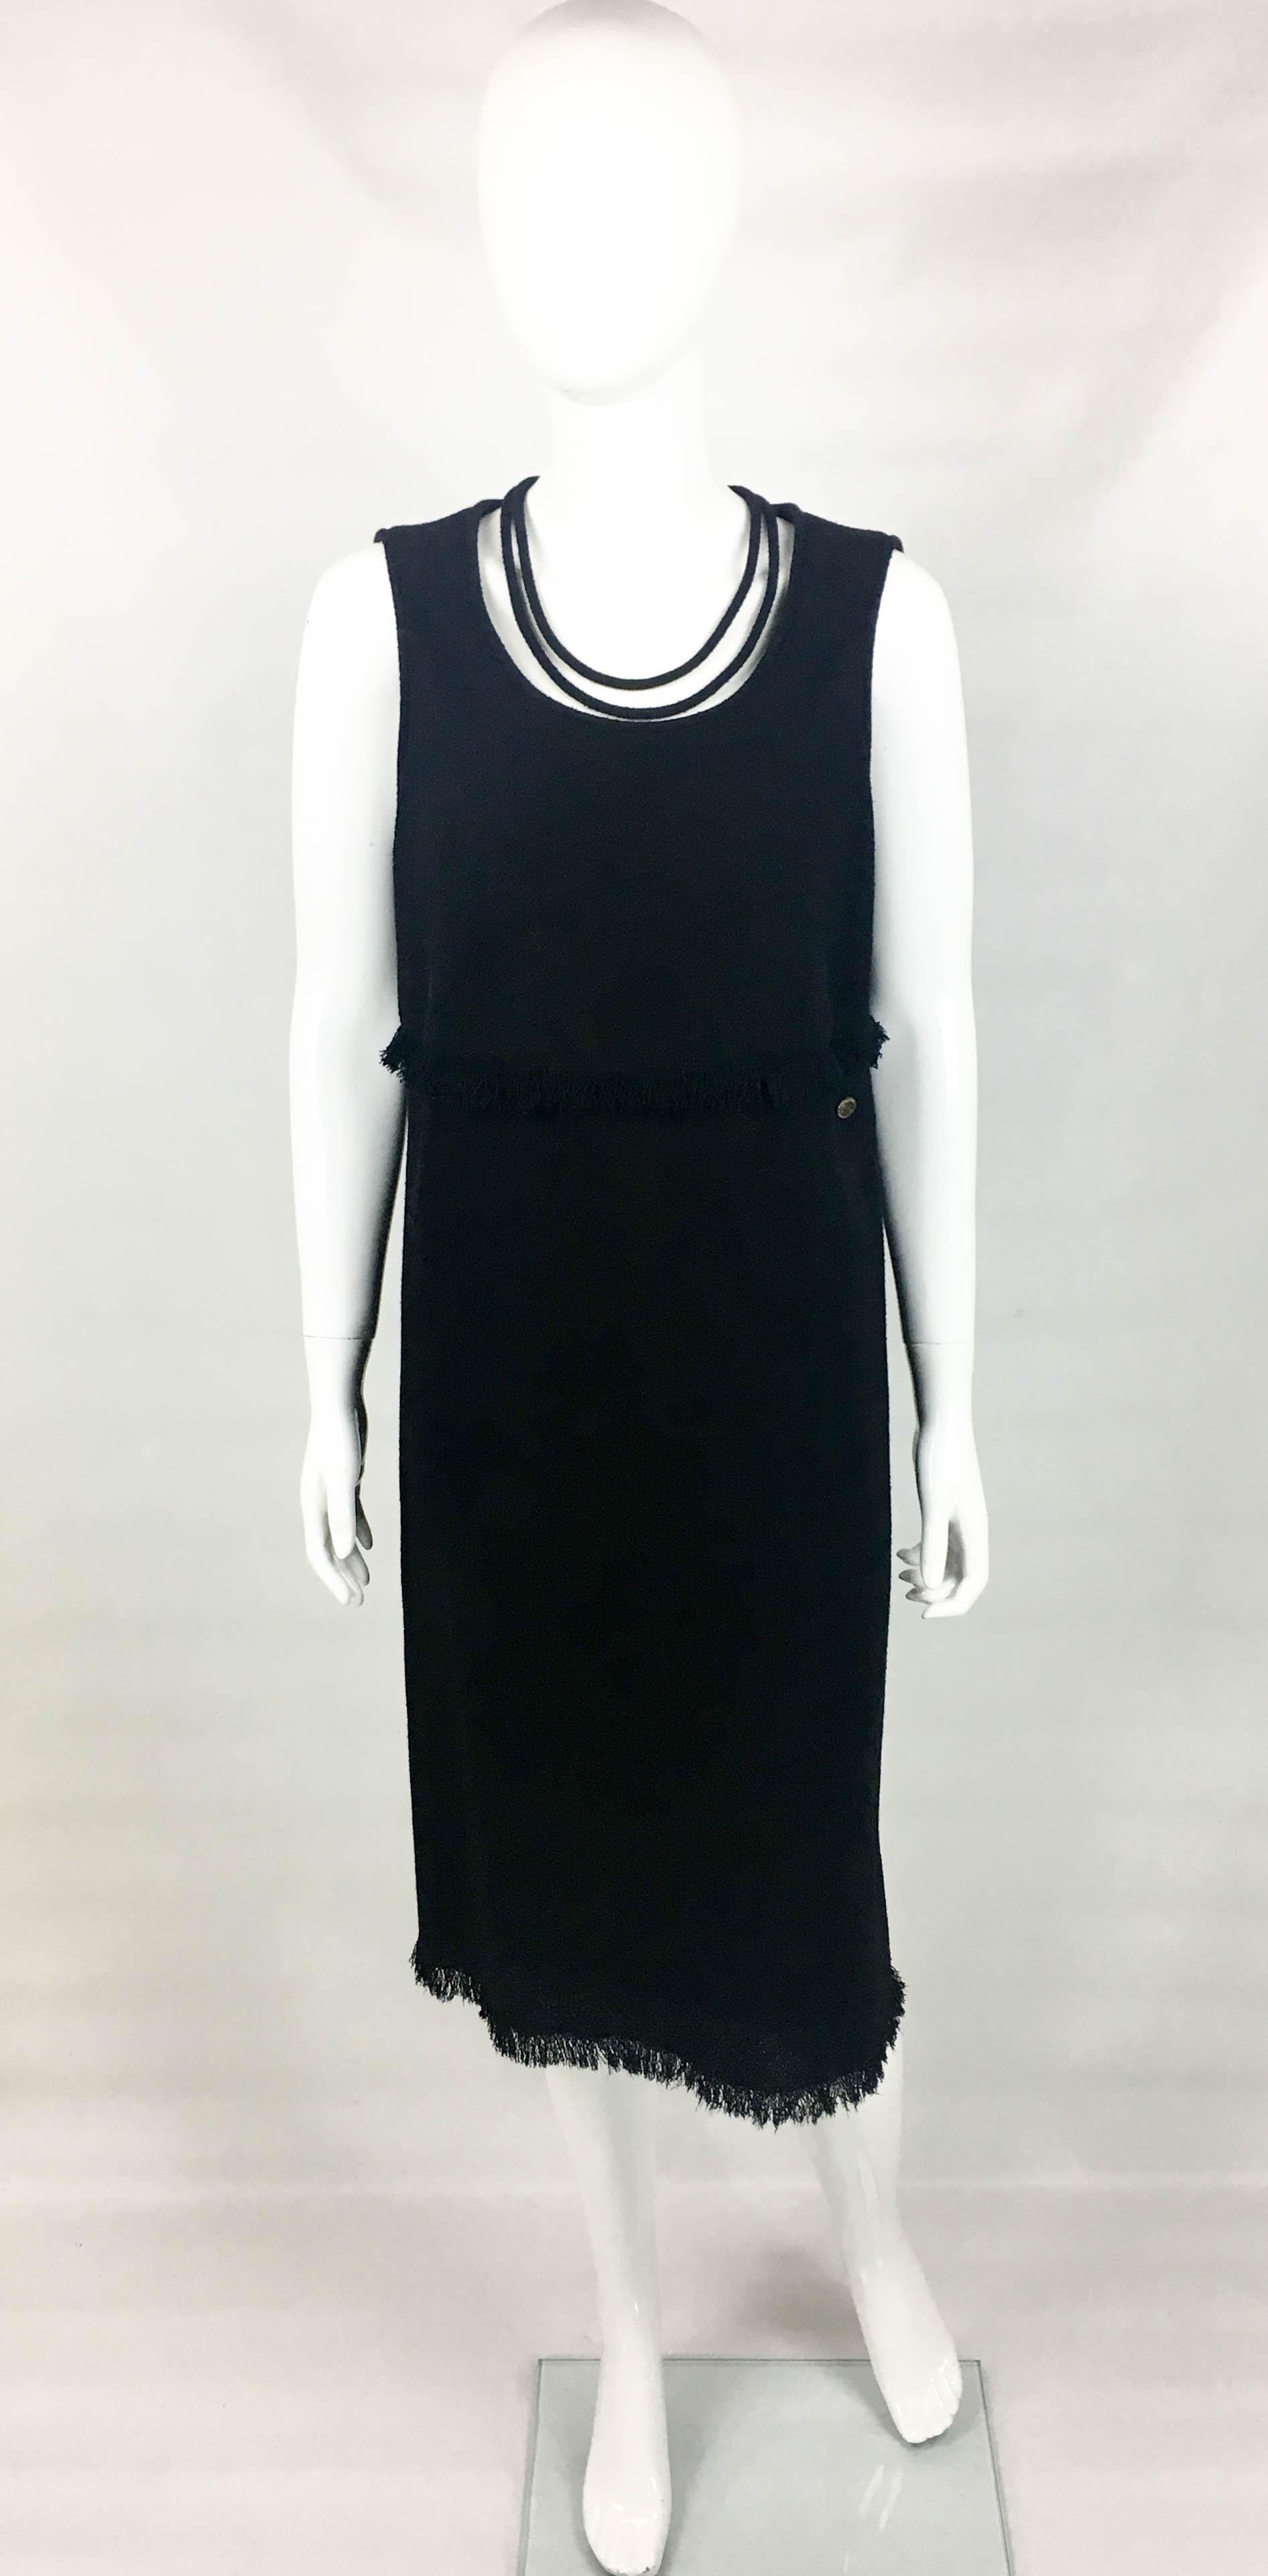 Chanel Black Wool Dress With fringing detail. This beautiful Chanel sleeveless dress is timeless piece. Made in wool, it features fringing to the waist and hem, as well as a cord detail to the neckline. It is midi in length and straight cut. Silk